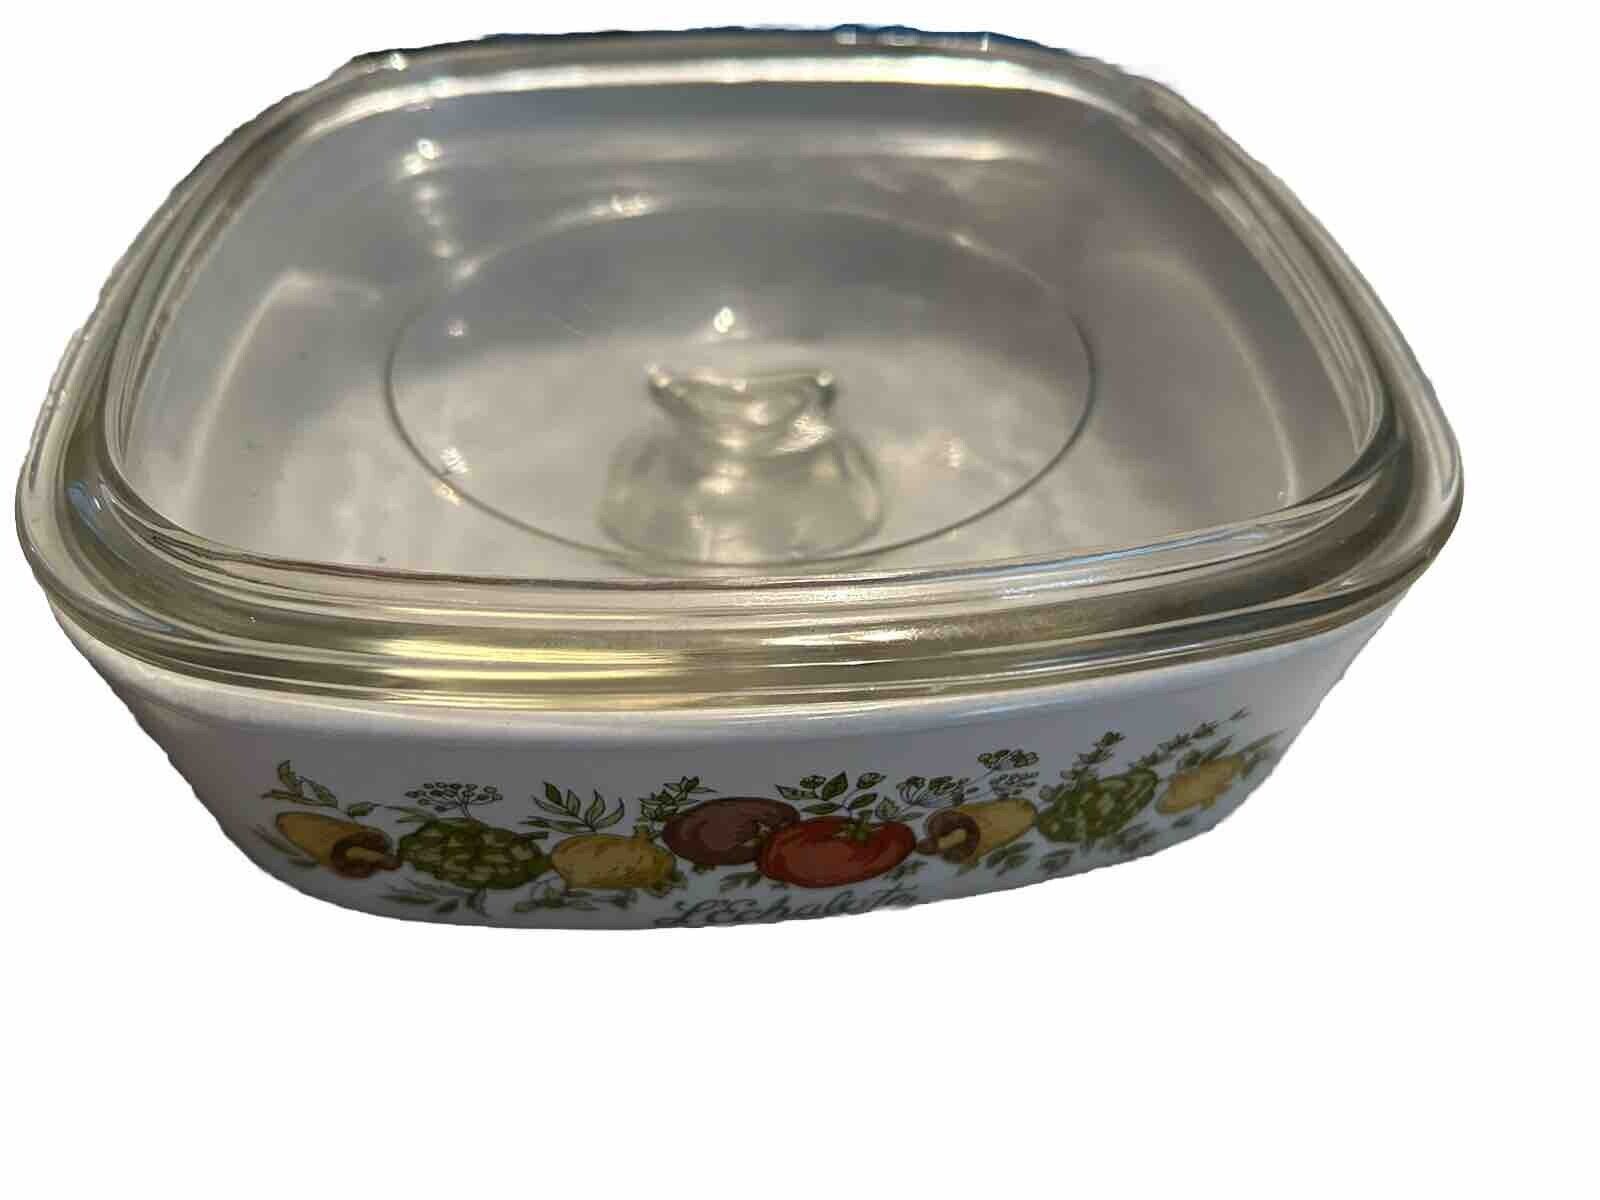 Vintage Corning Ware Spice of Life “L”Echalate La Sauge Casserole Dish With Top 